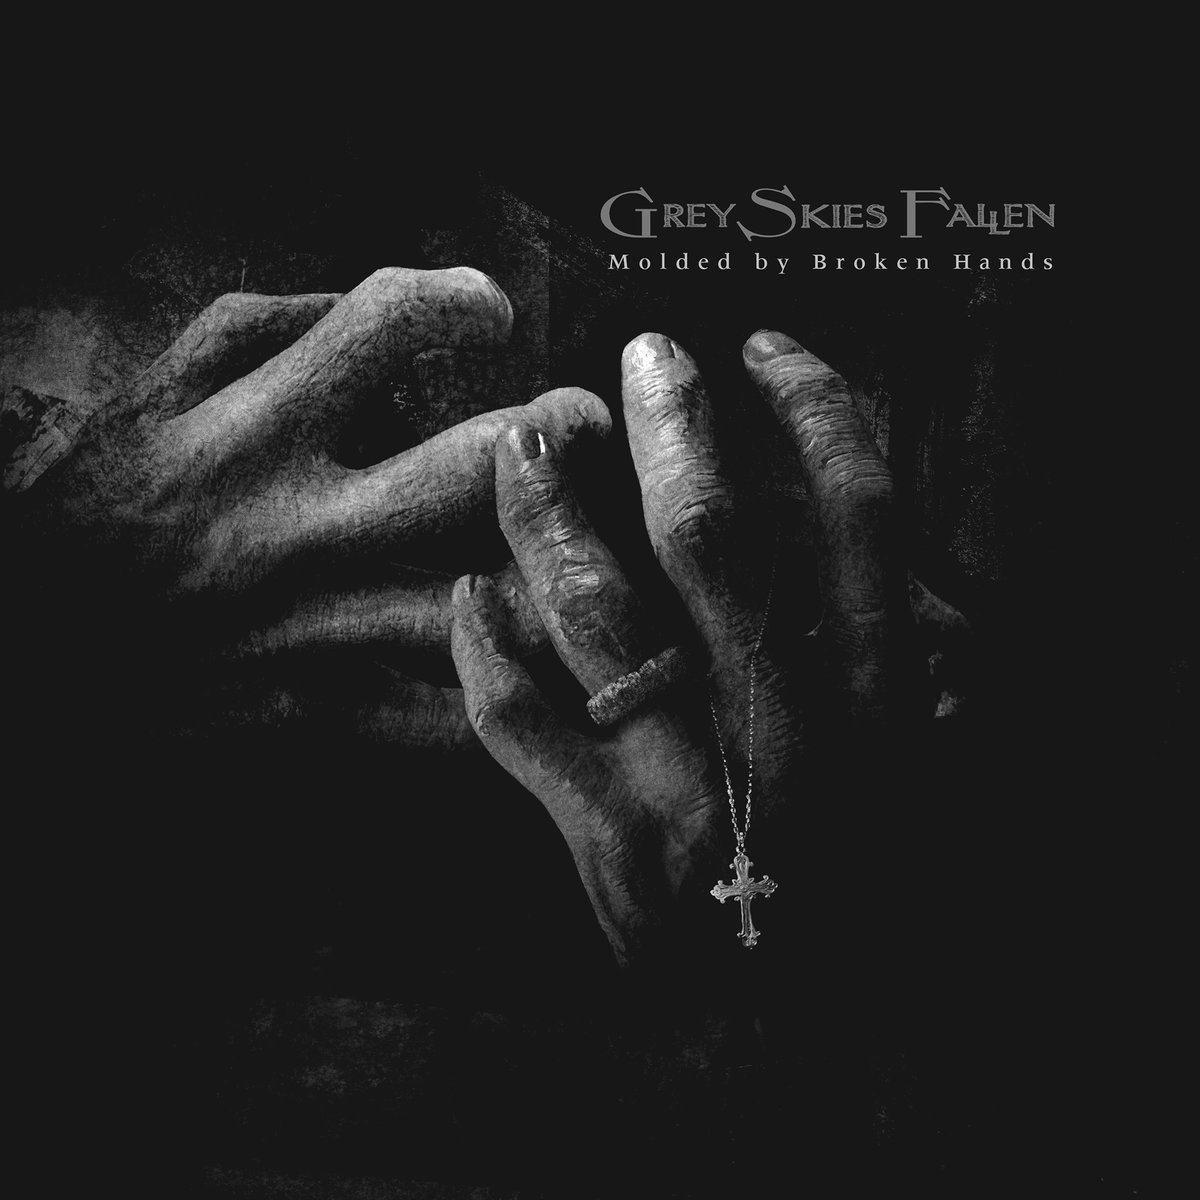 Grey Skies Fallen Molded by Broken Hands (Profound Lore Records) teethofthedivine.com/reviews/grey-s… @GreySkiesFallen @profoundlore @TeethofDivine